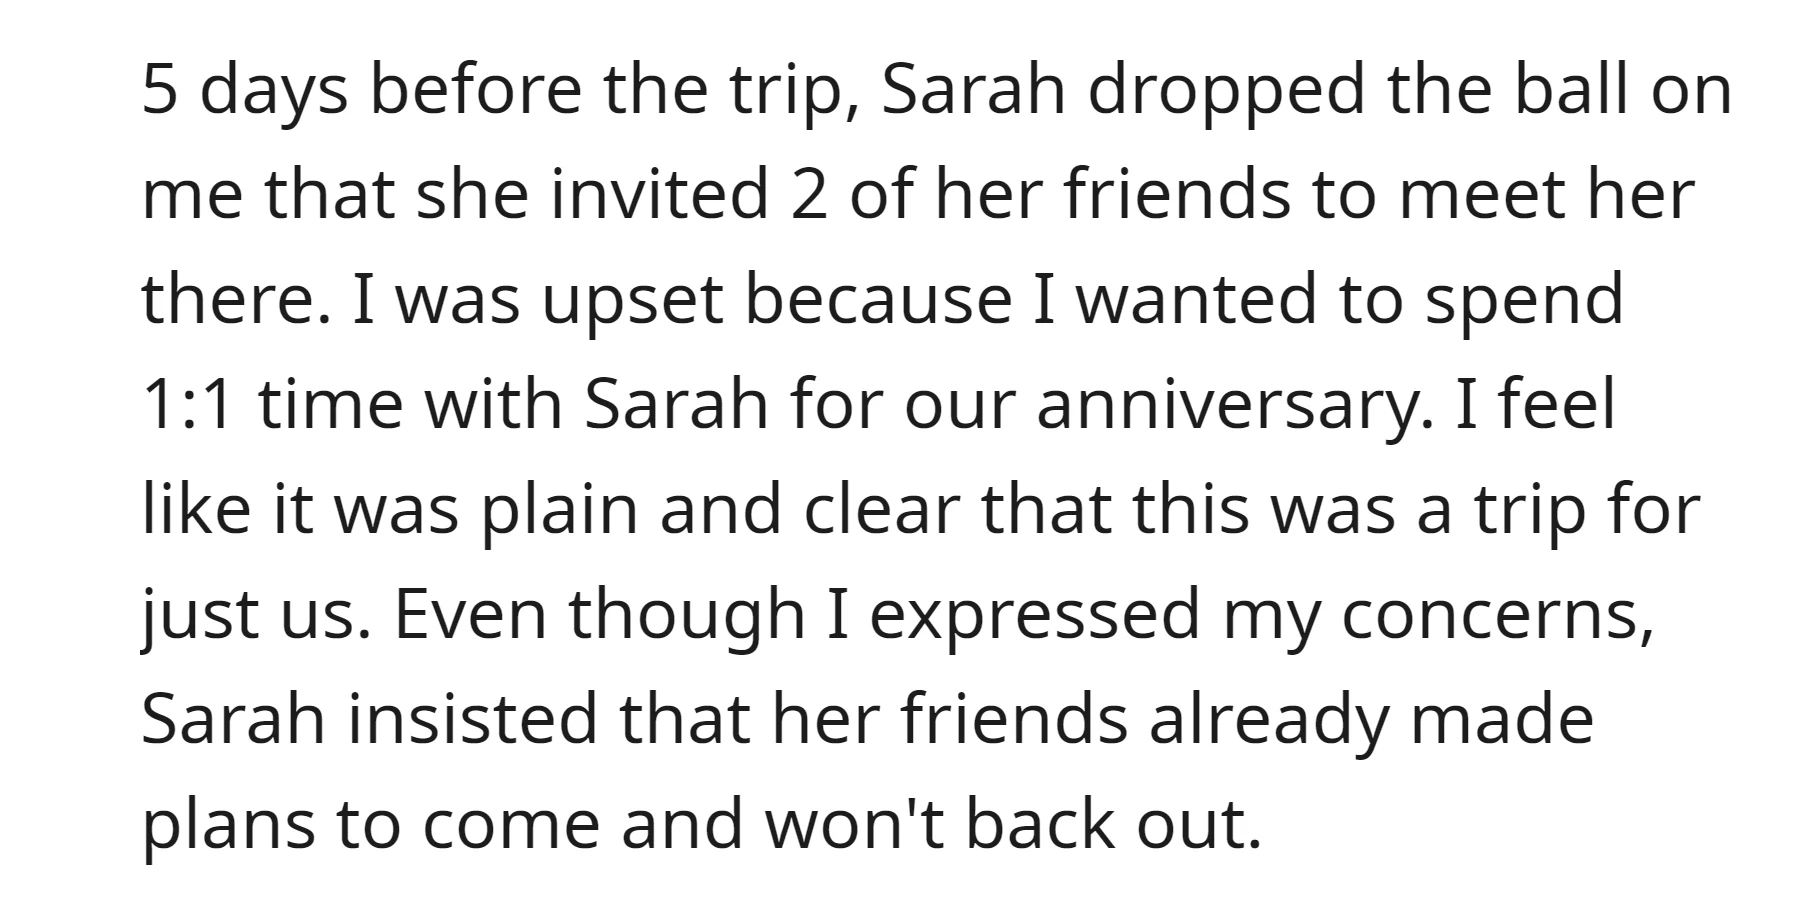 Sarah invited two friends to join, which ruined the OP's plan